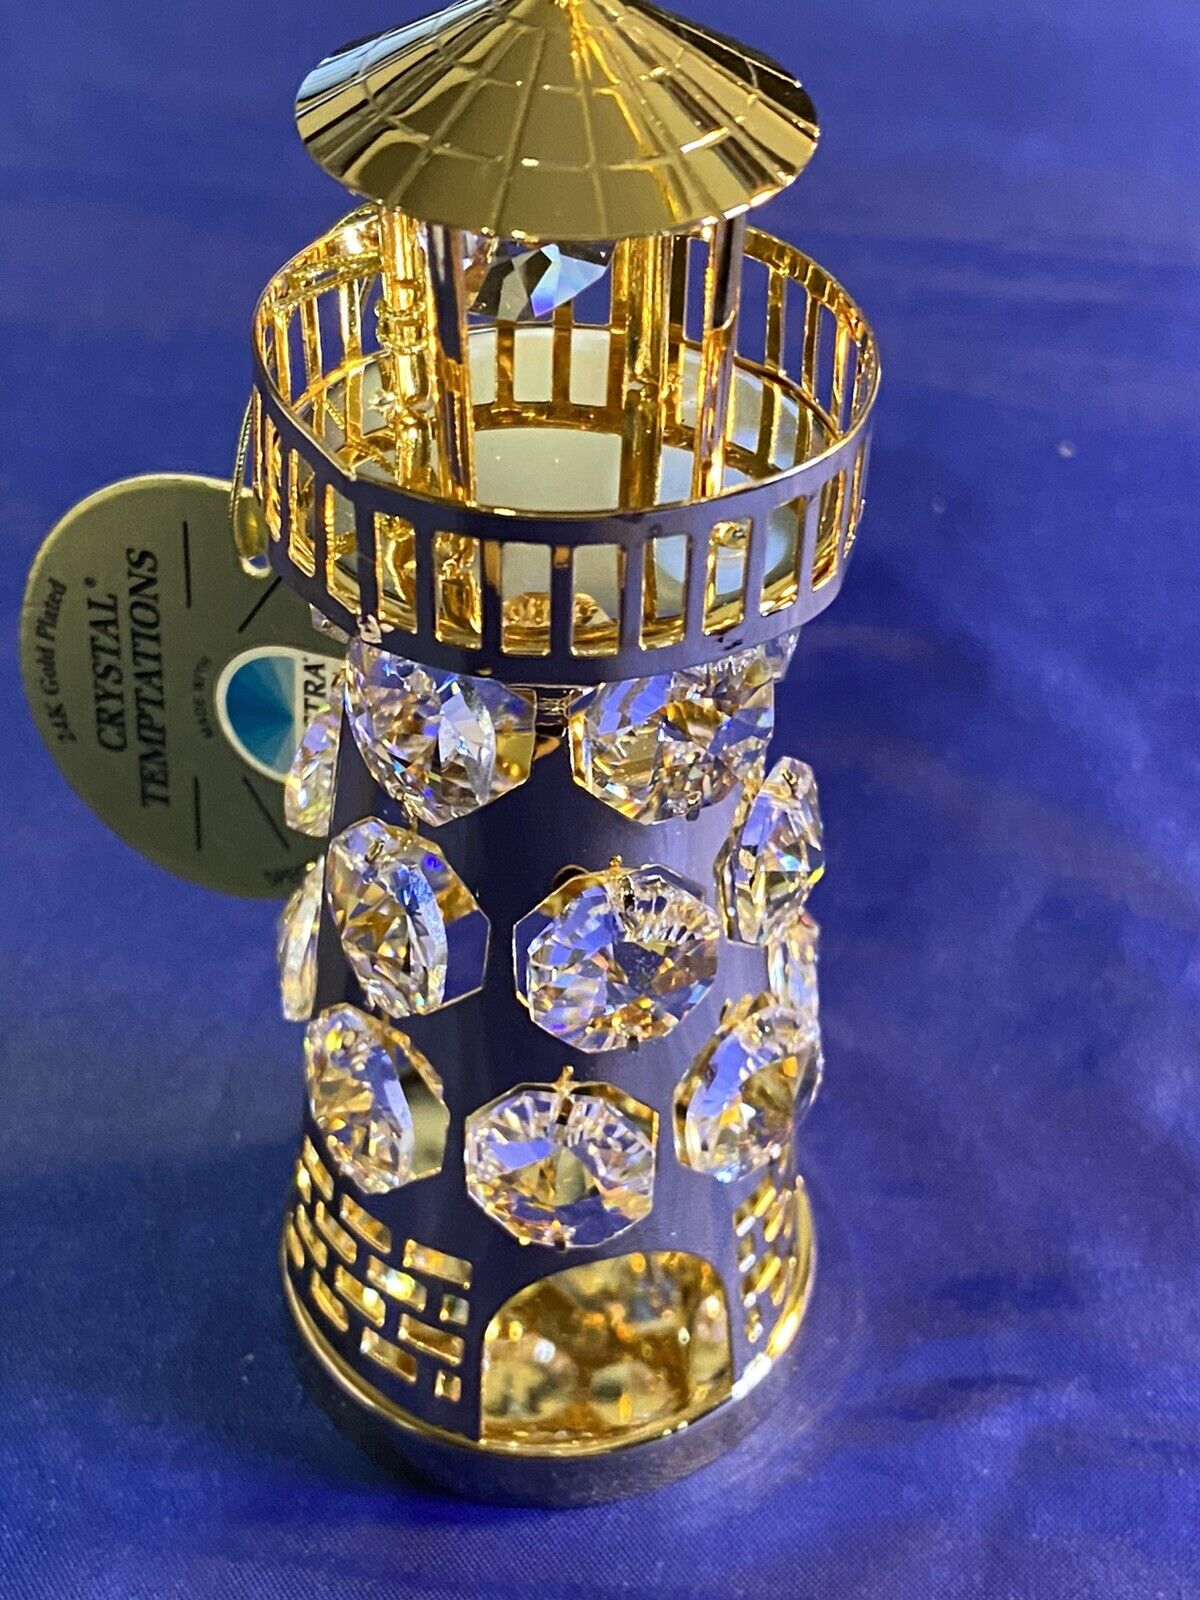 Lighthouse Gold Plated With Crystals Ornament